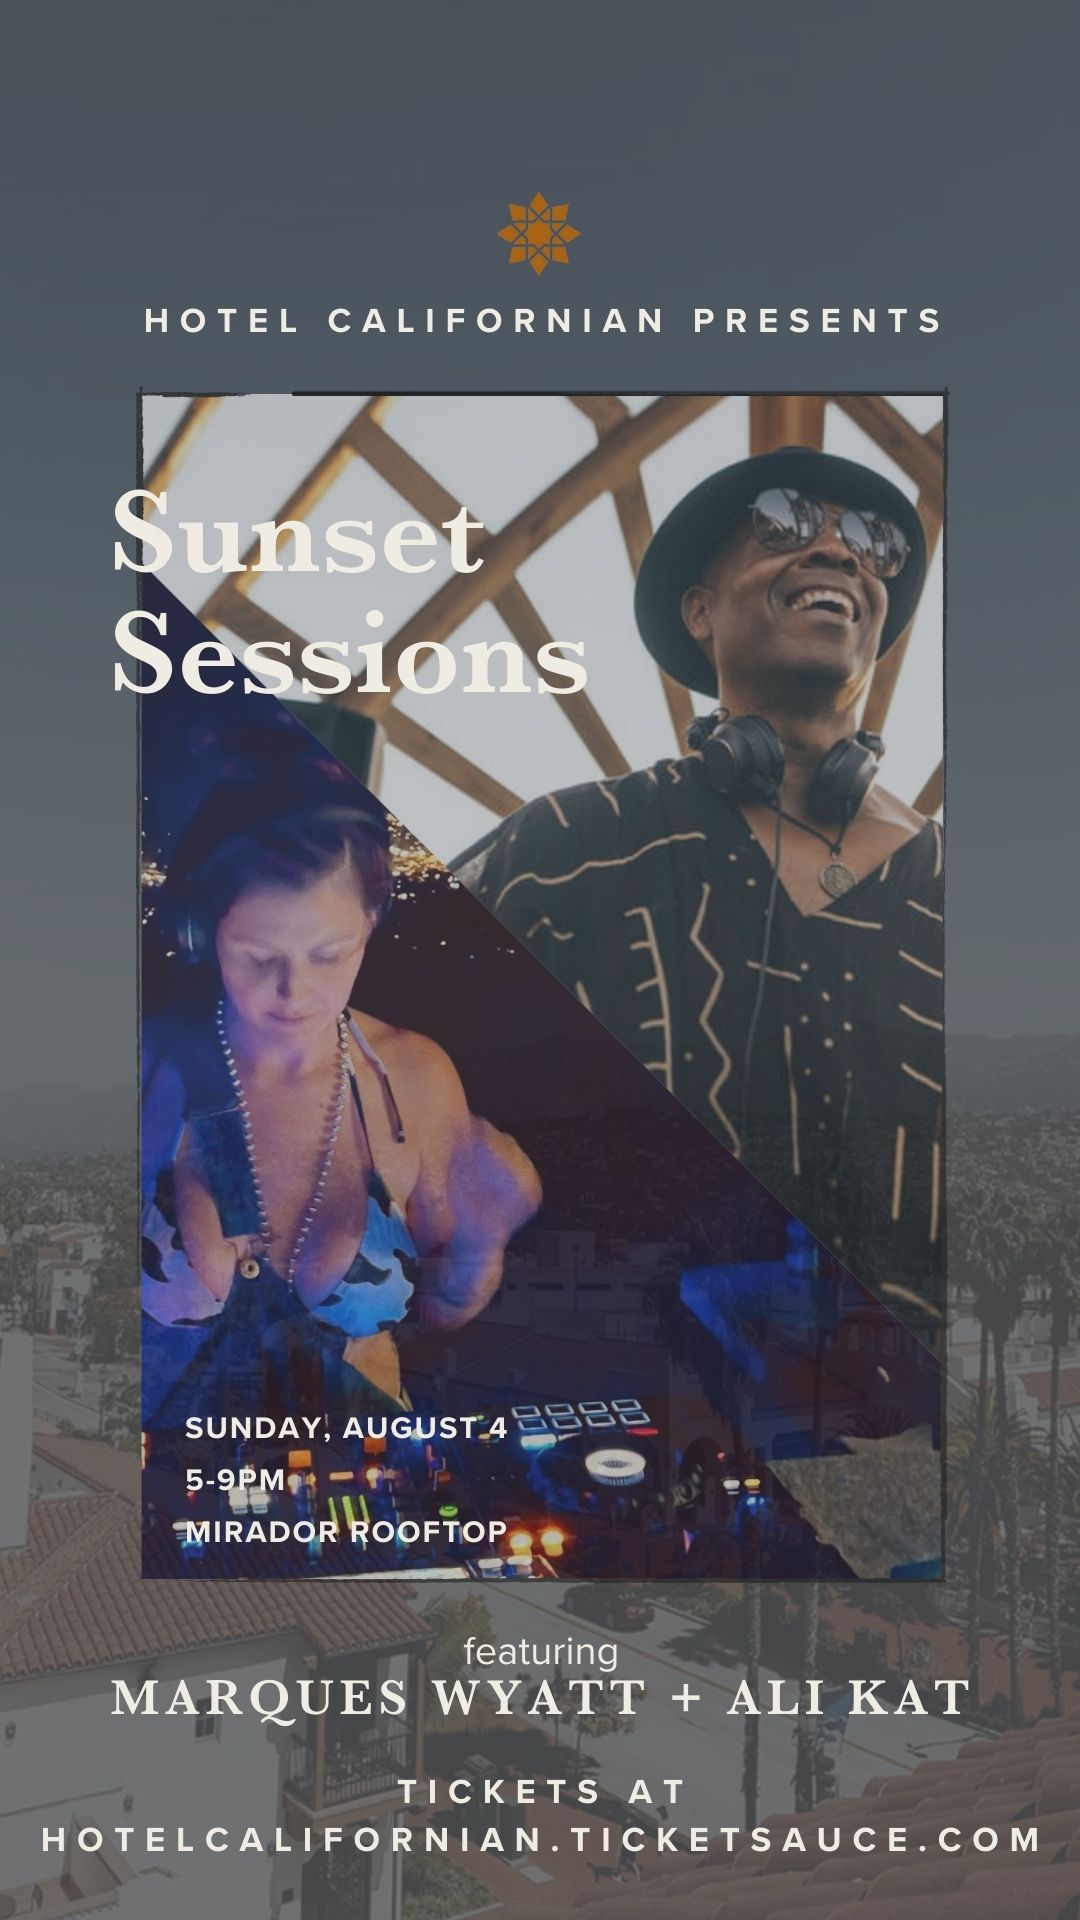 Sunset Sessions featuring Marques Wyatt + Ali Kat